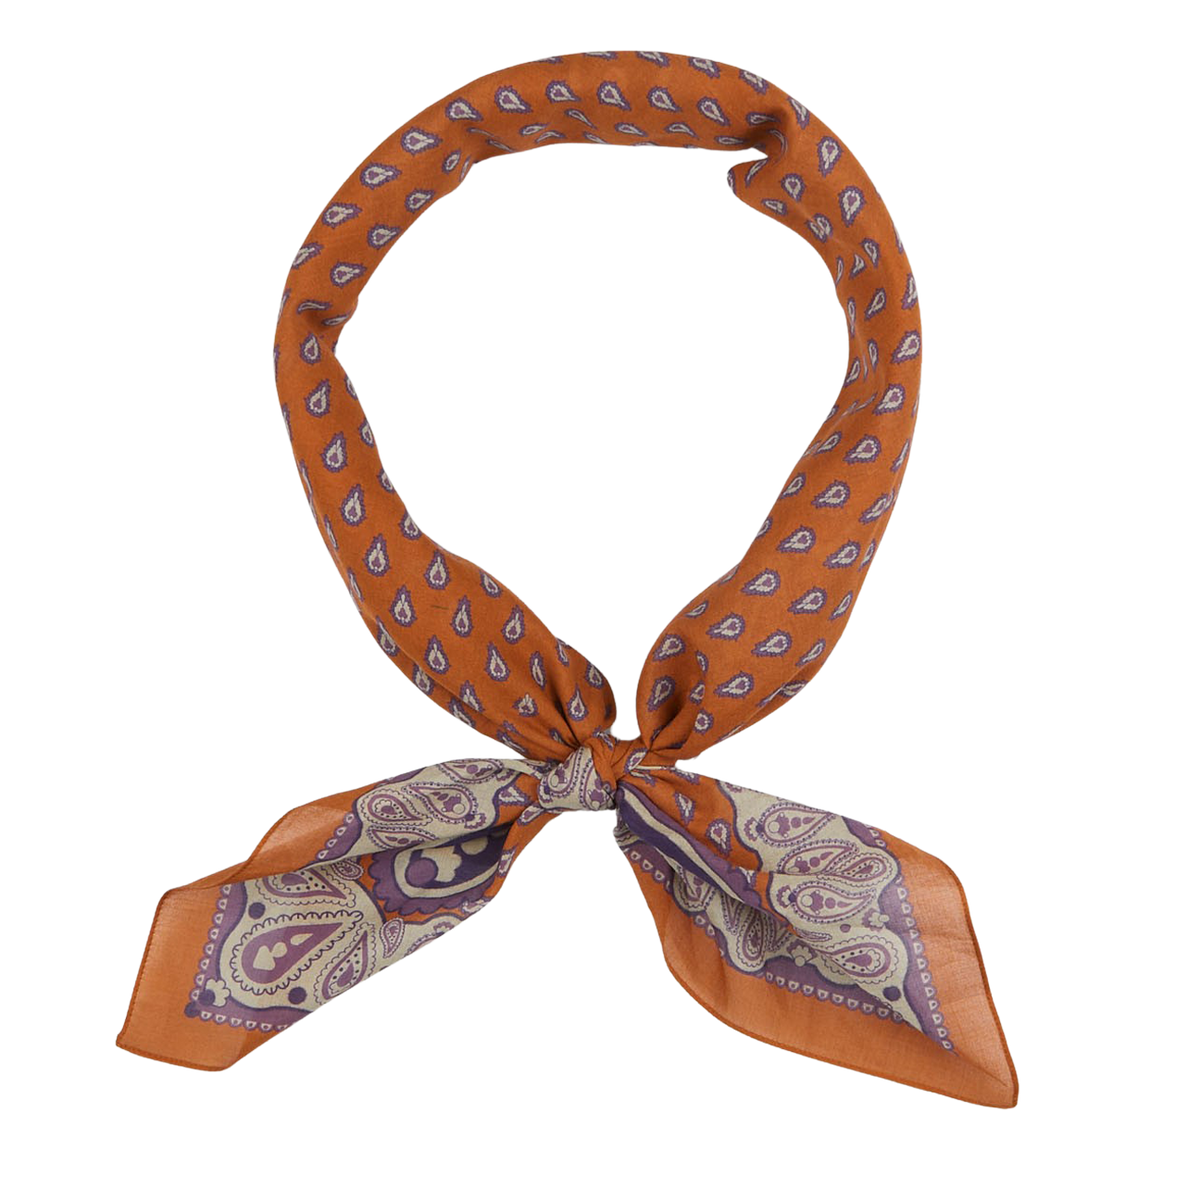 A neatly tied Sienna Brown Paisley Cotton Voile Bandana from De Bonne Facture displayed against a white background.